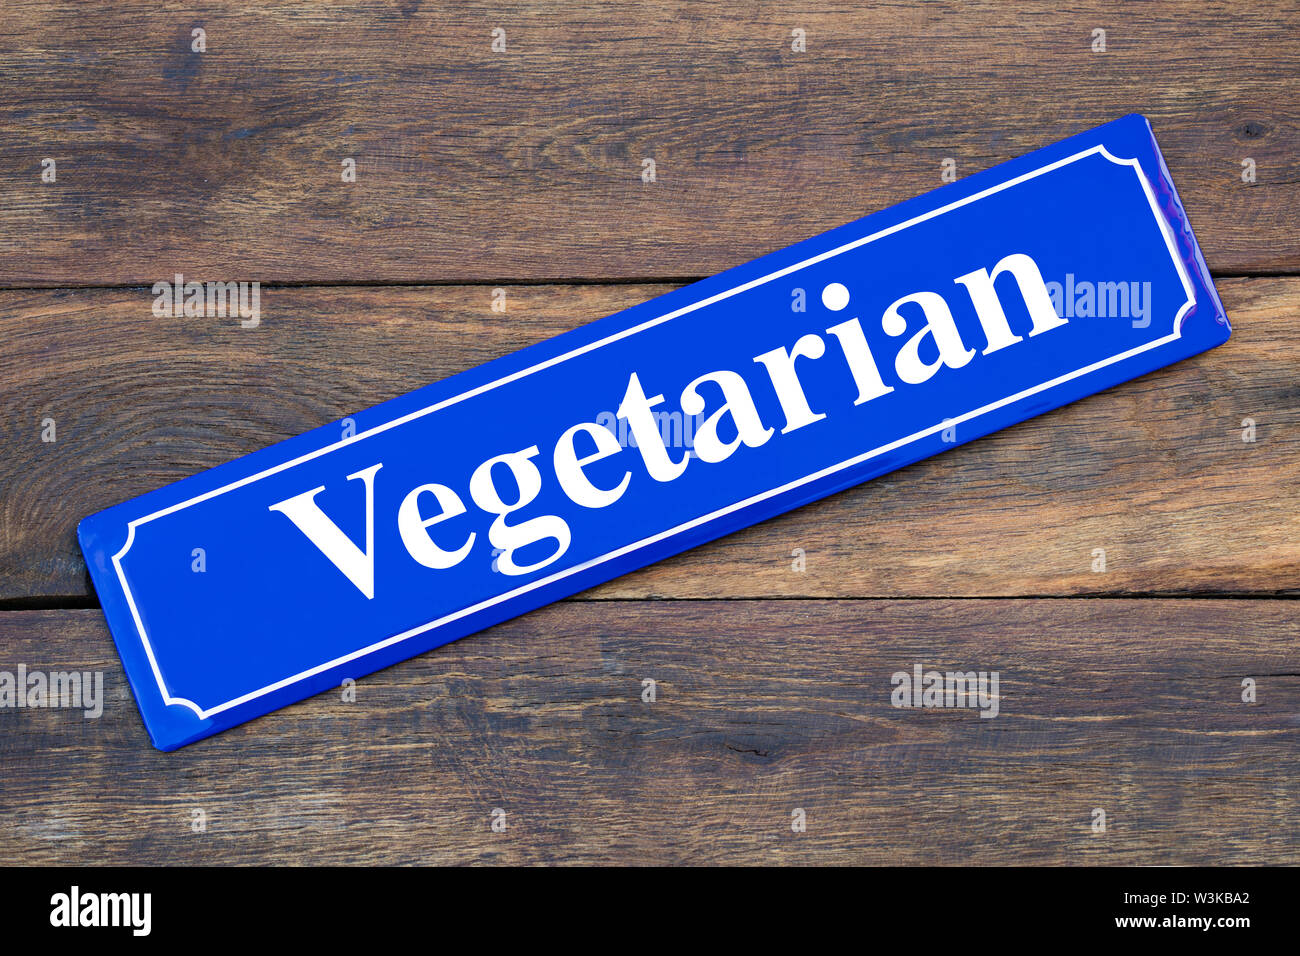 Vegetarian street sign on wooden background as symbol for meatless nutrition Stock Photo